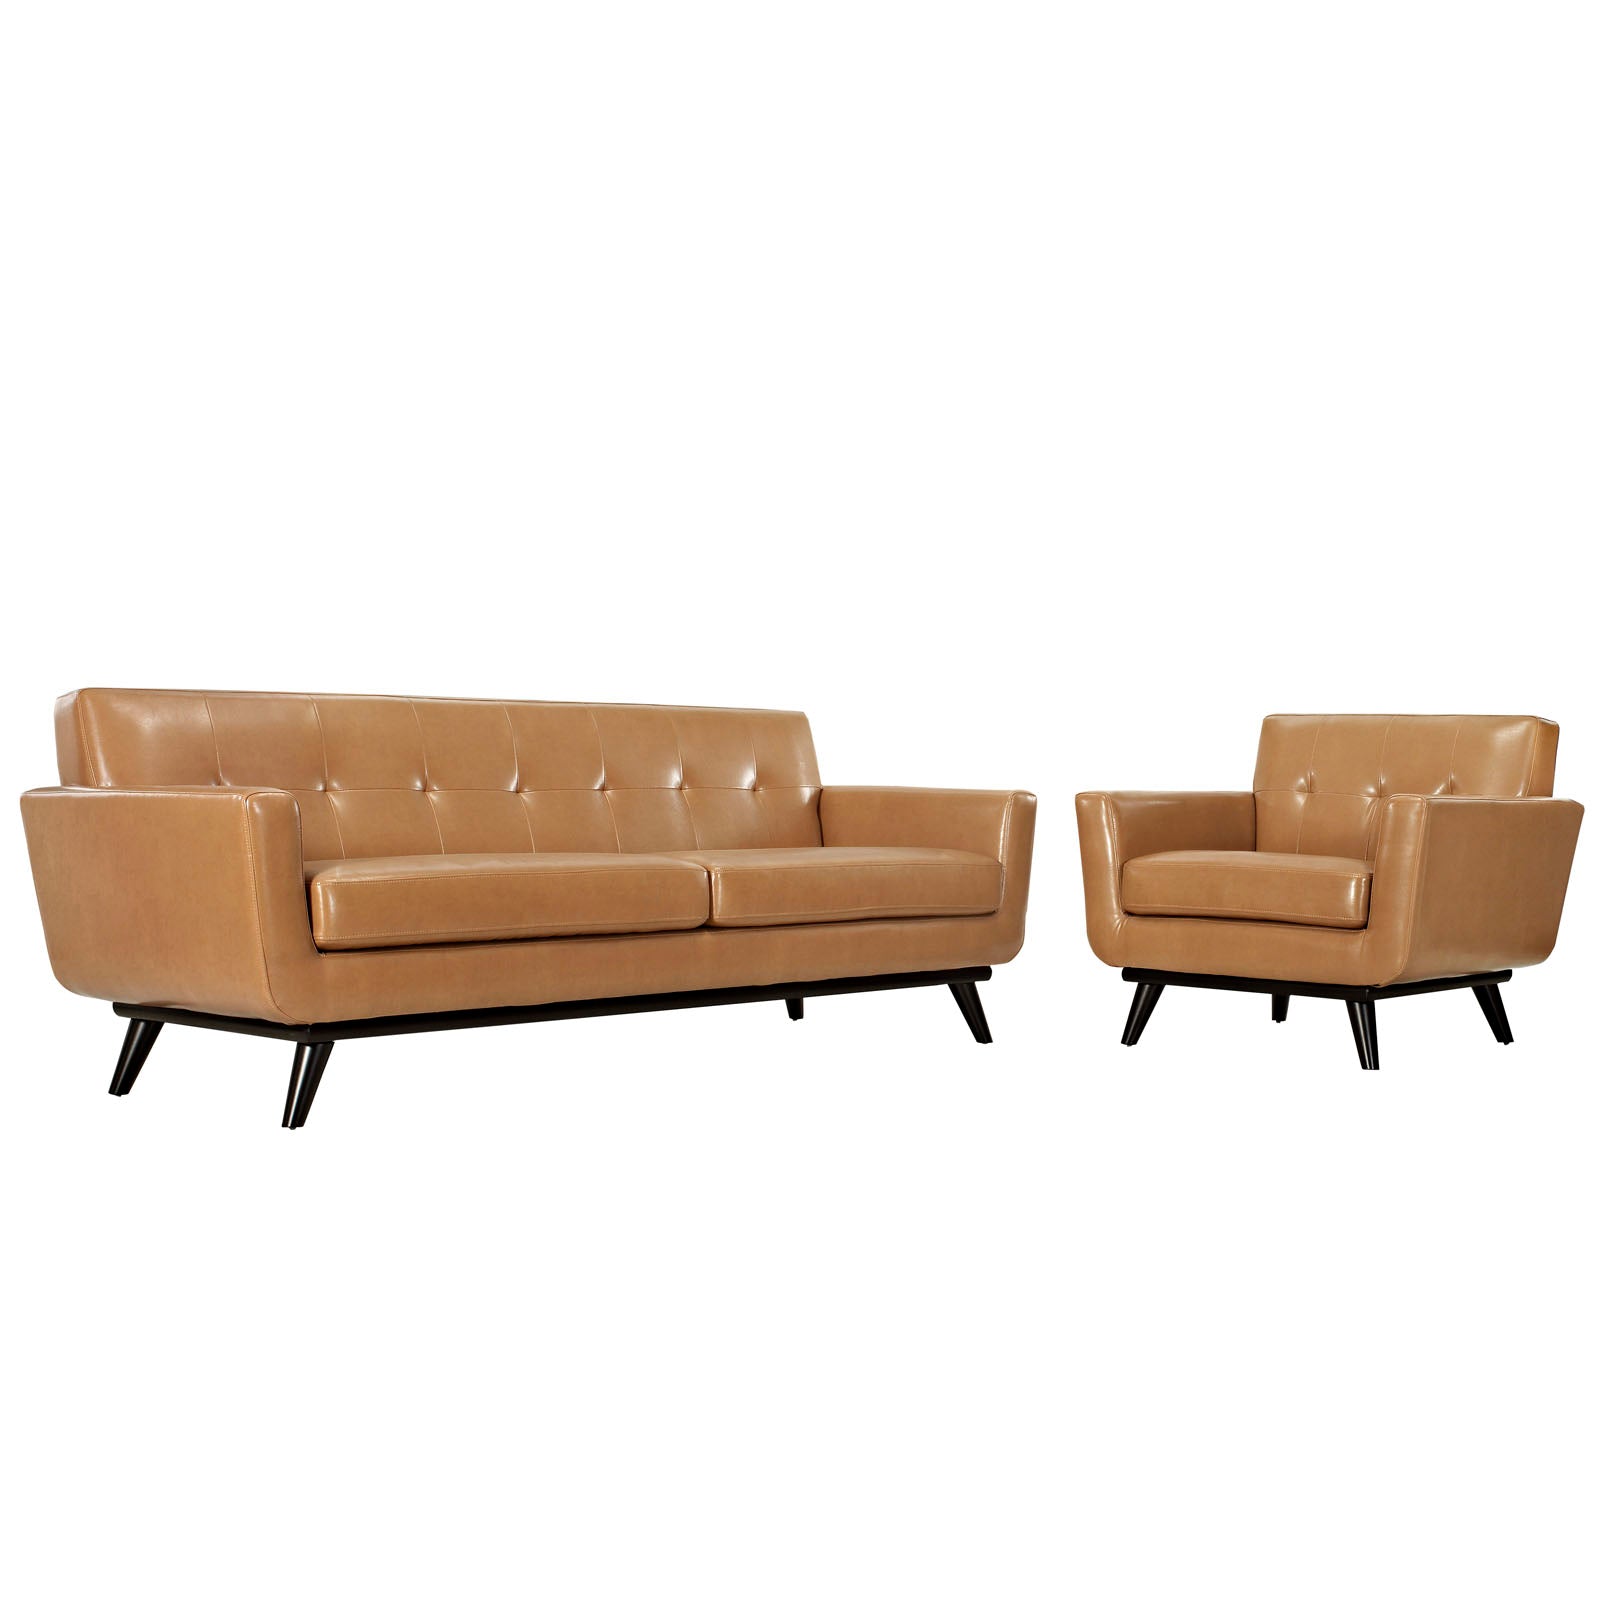 Modway Living Room Sets - Engage 2 Piece Leather Living Room Set Tan